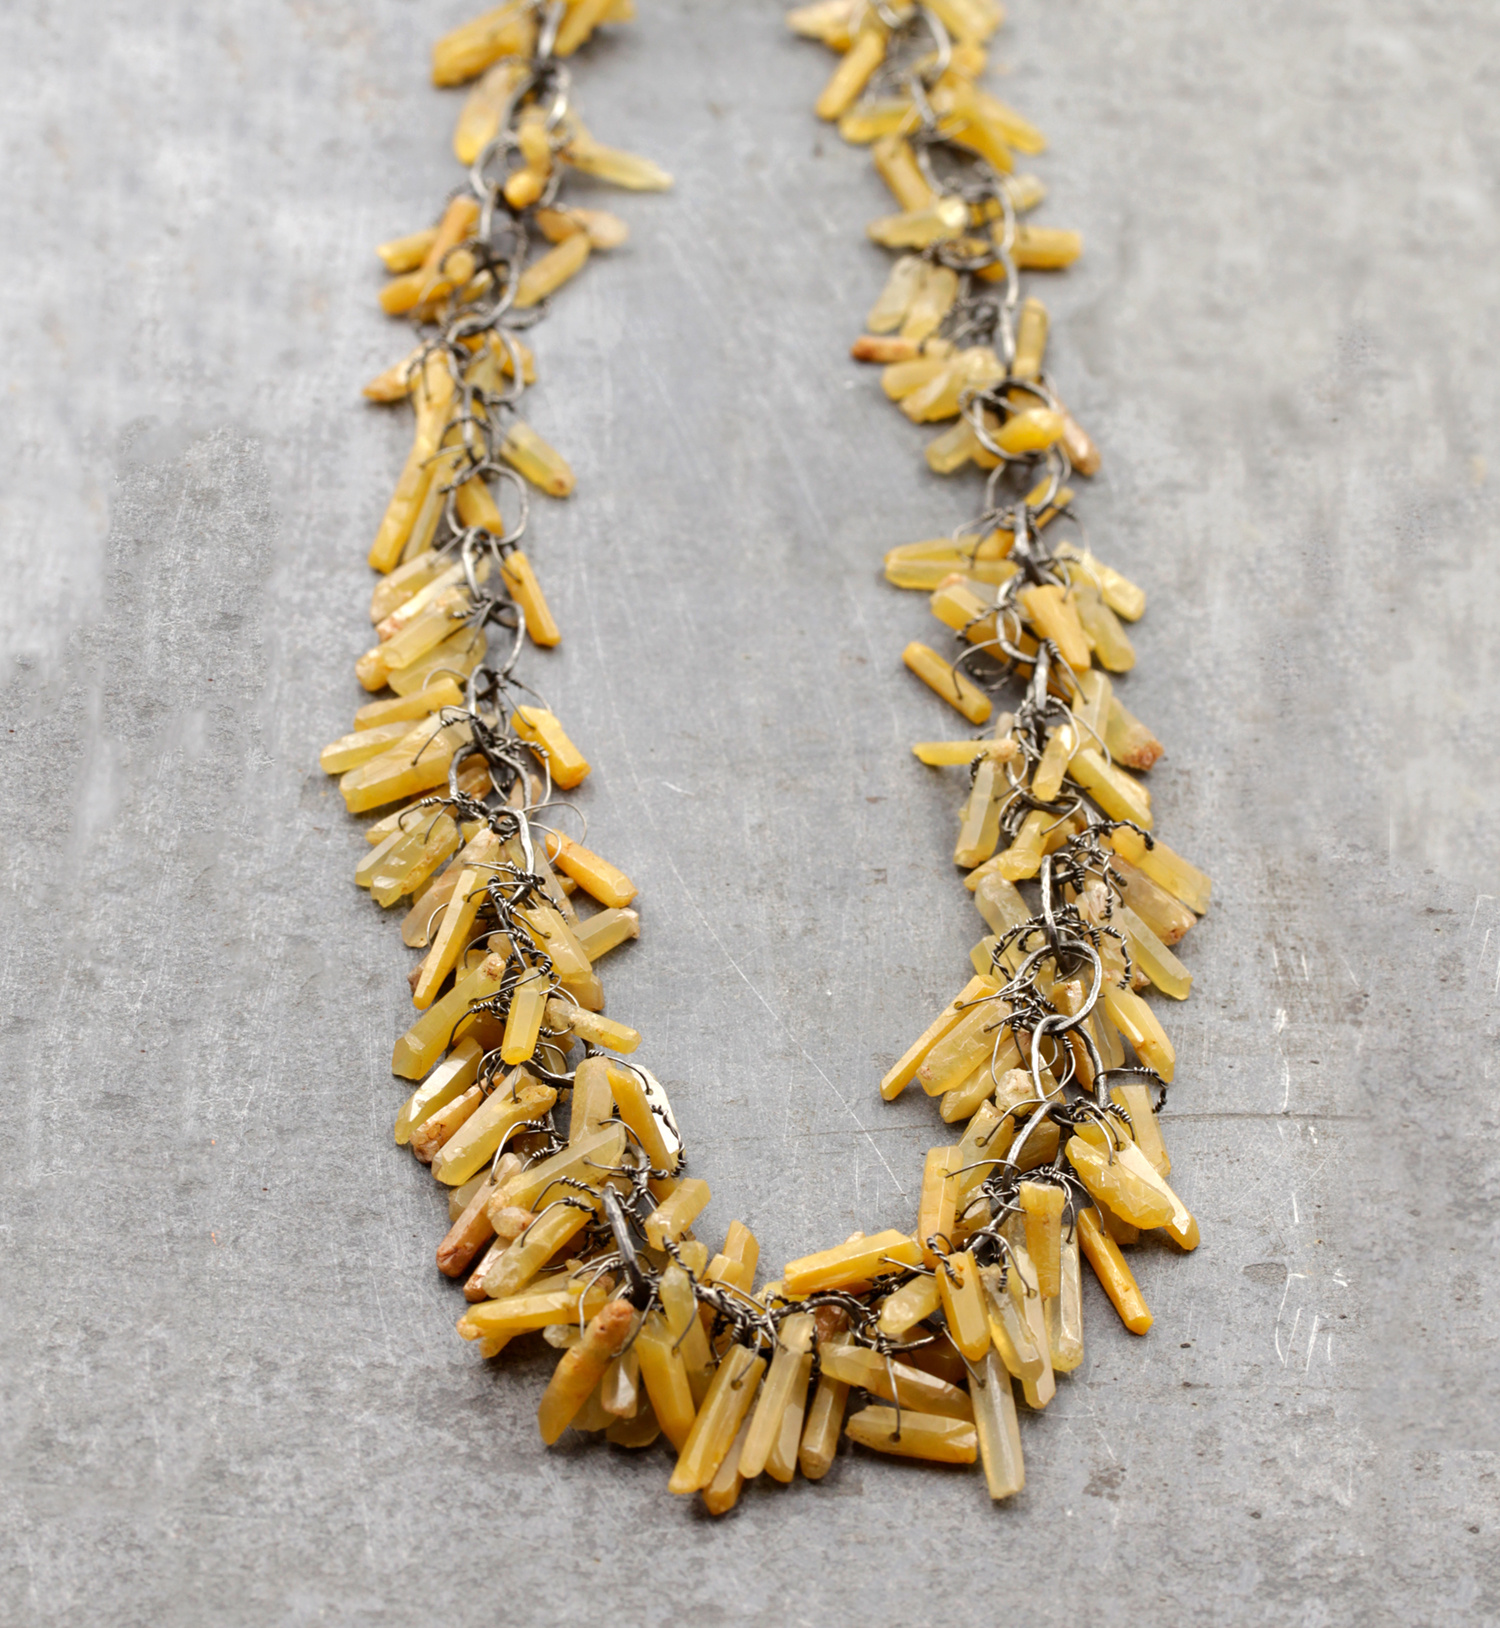 Necklace by Disa Allsopp